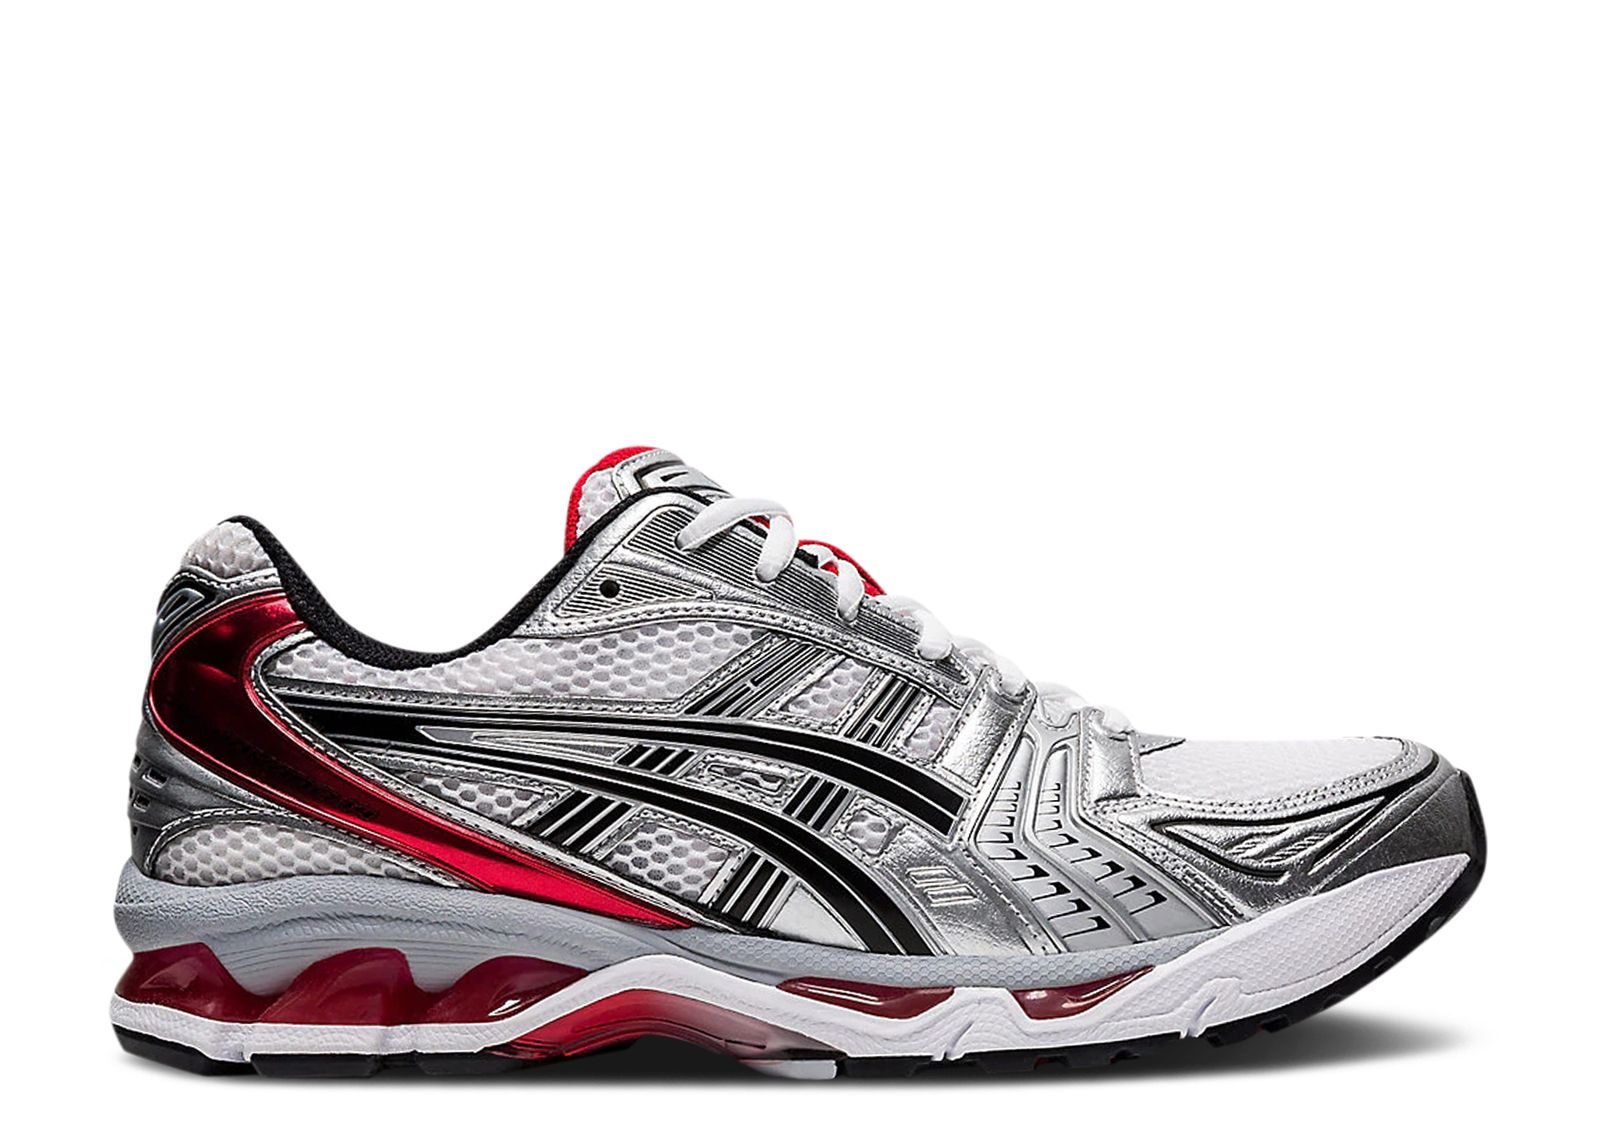 Gel Kayano 14 'Classic Red' - ASICS - 1201A019 103 - white/classic red ...